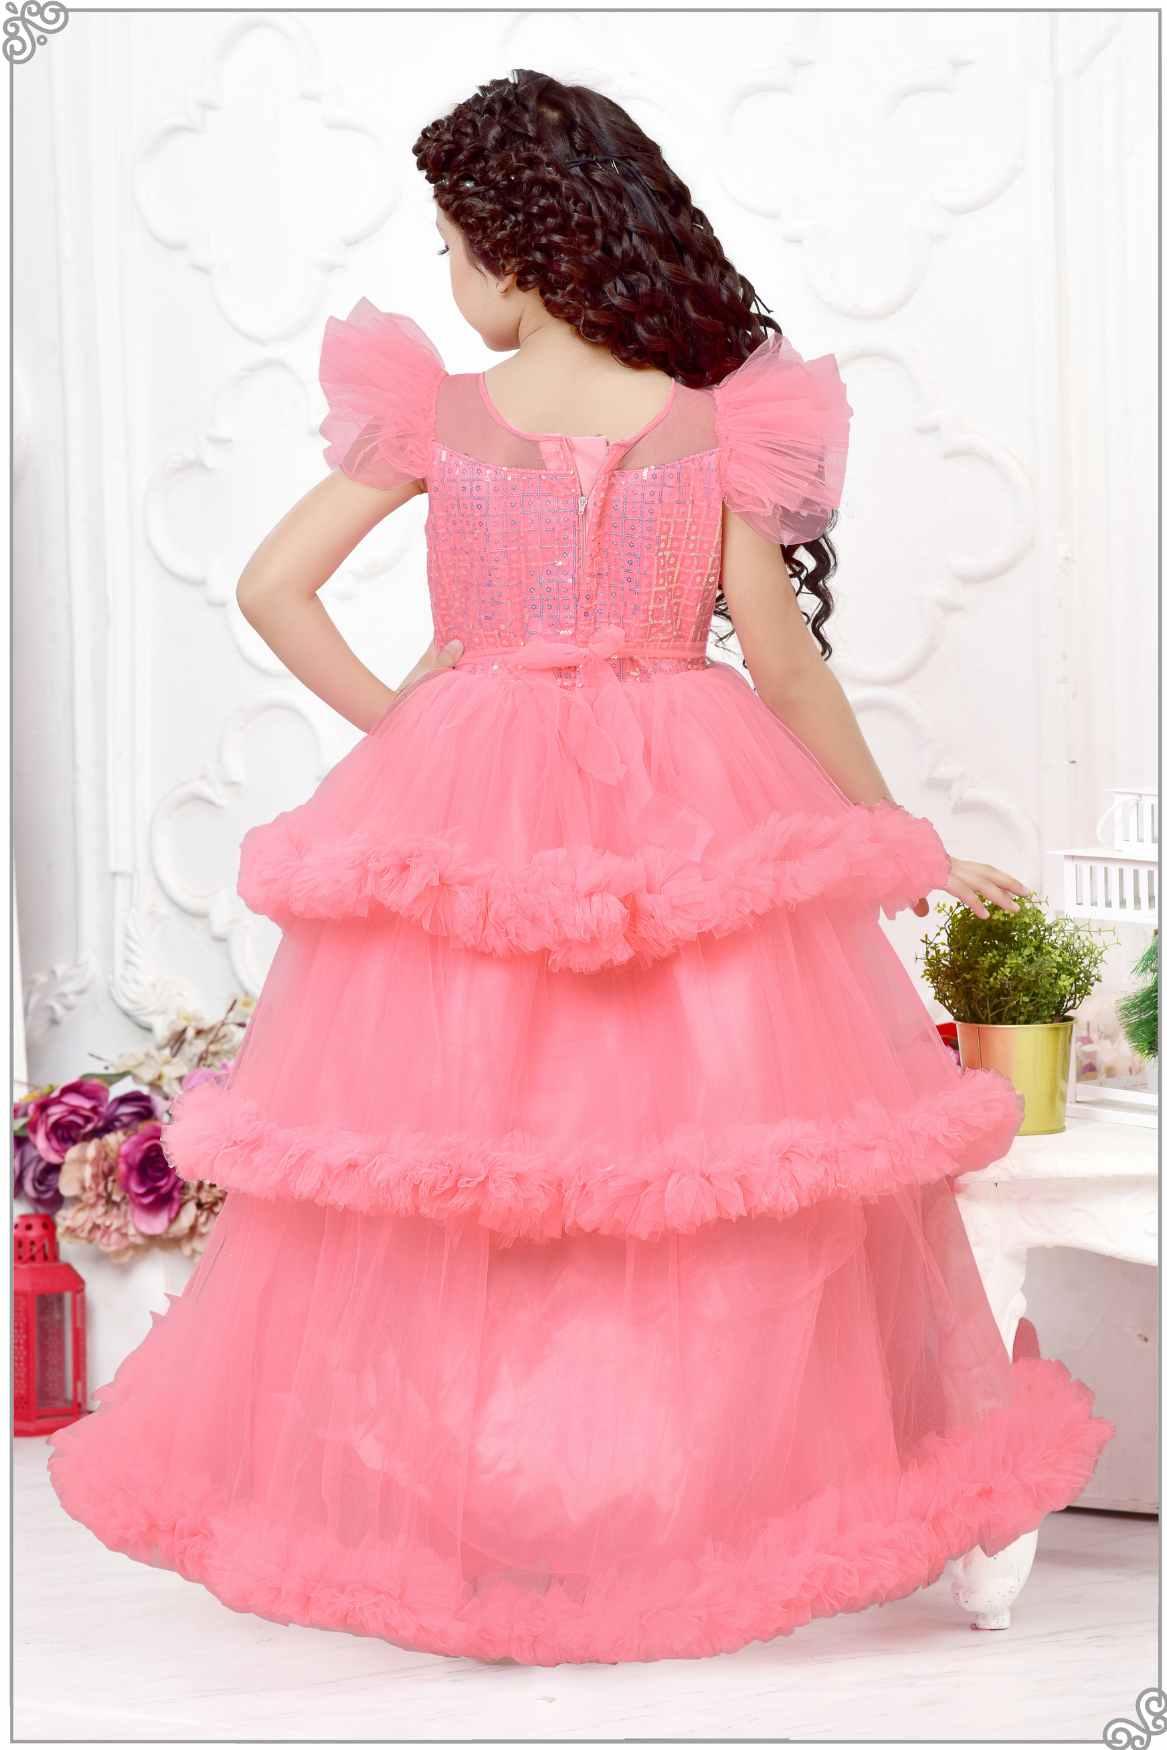 Pink Sequin Multilayered Ruffled Net Party Gown With Bow Embellishment For Girls - Lagorii Kids